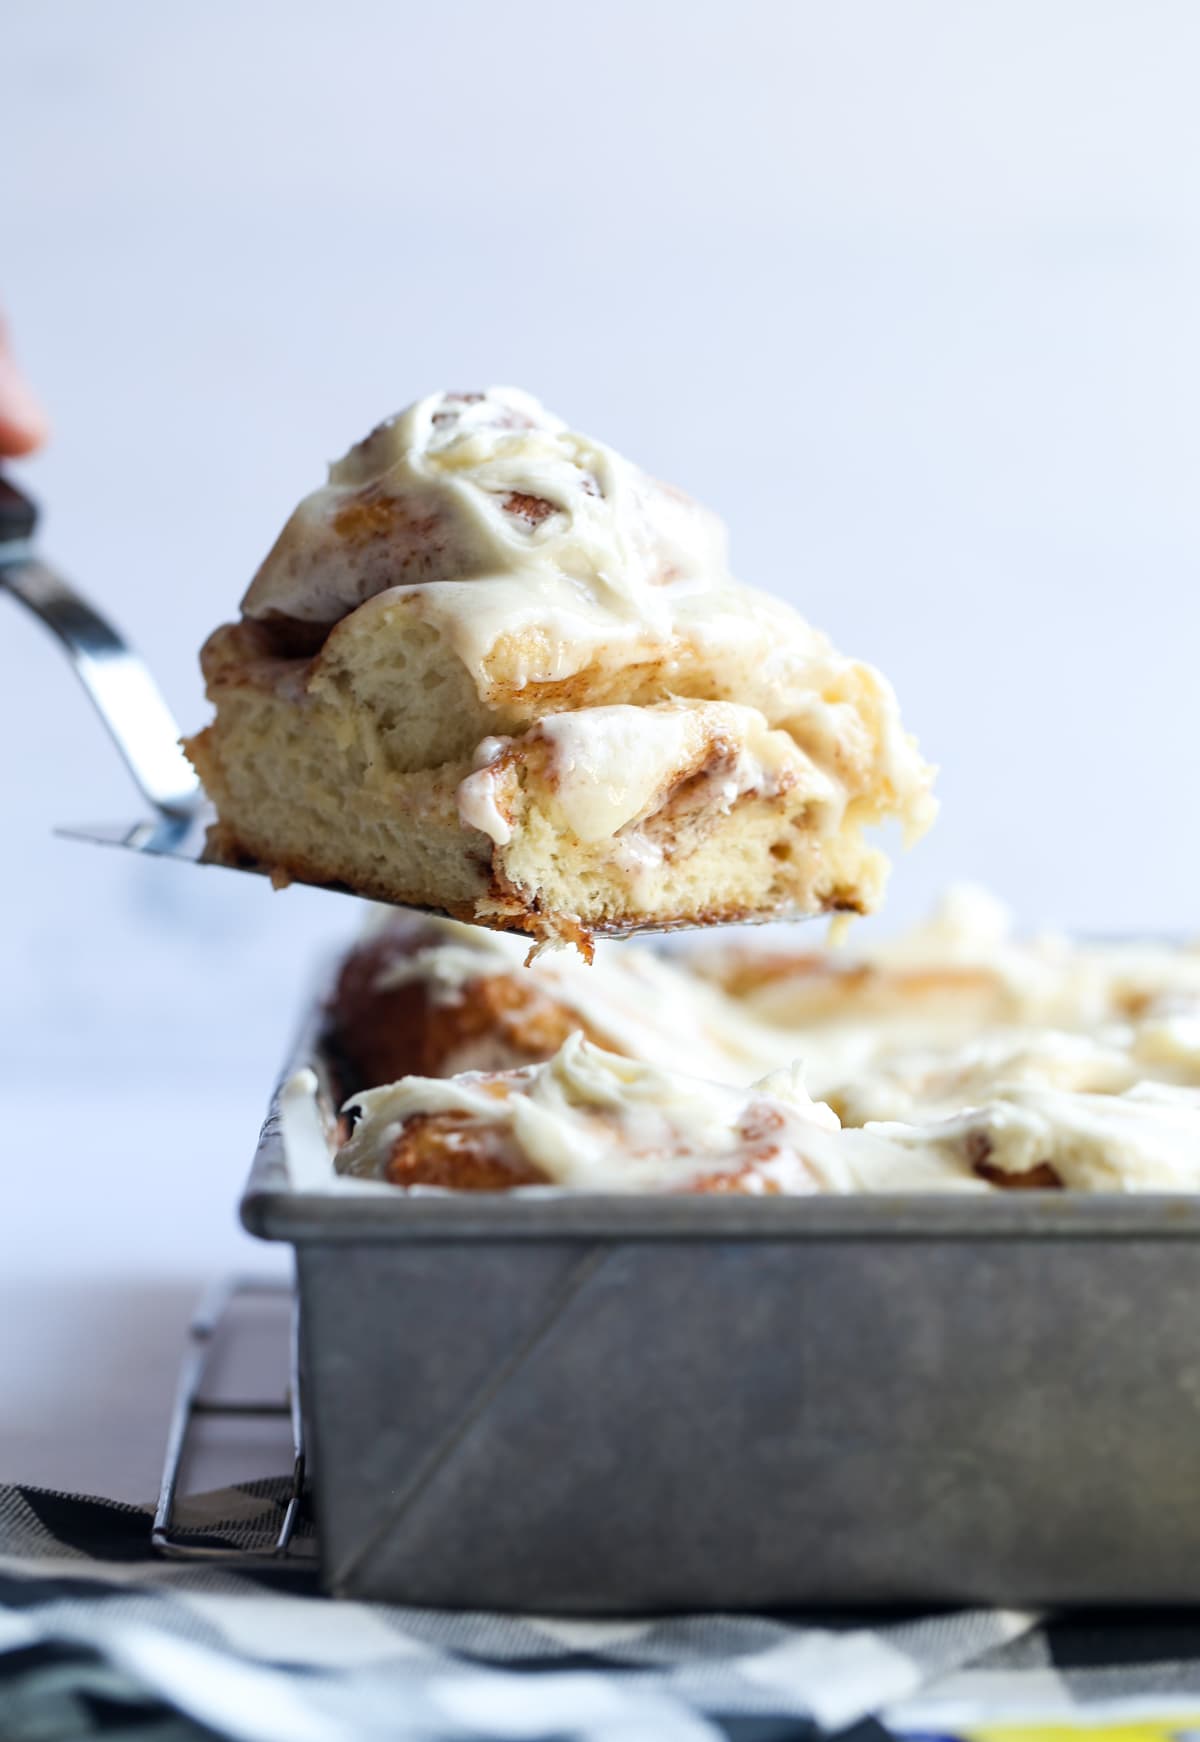 Serving a cinnamon bun on a spatula from the 9x13 pan